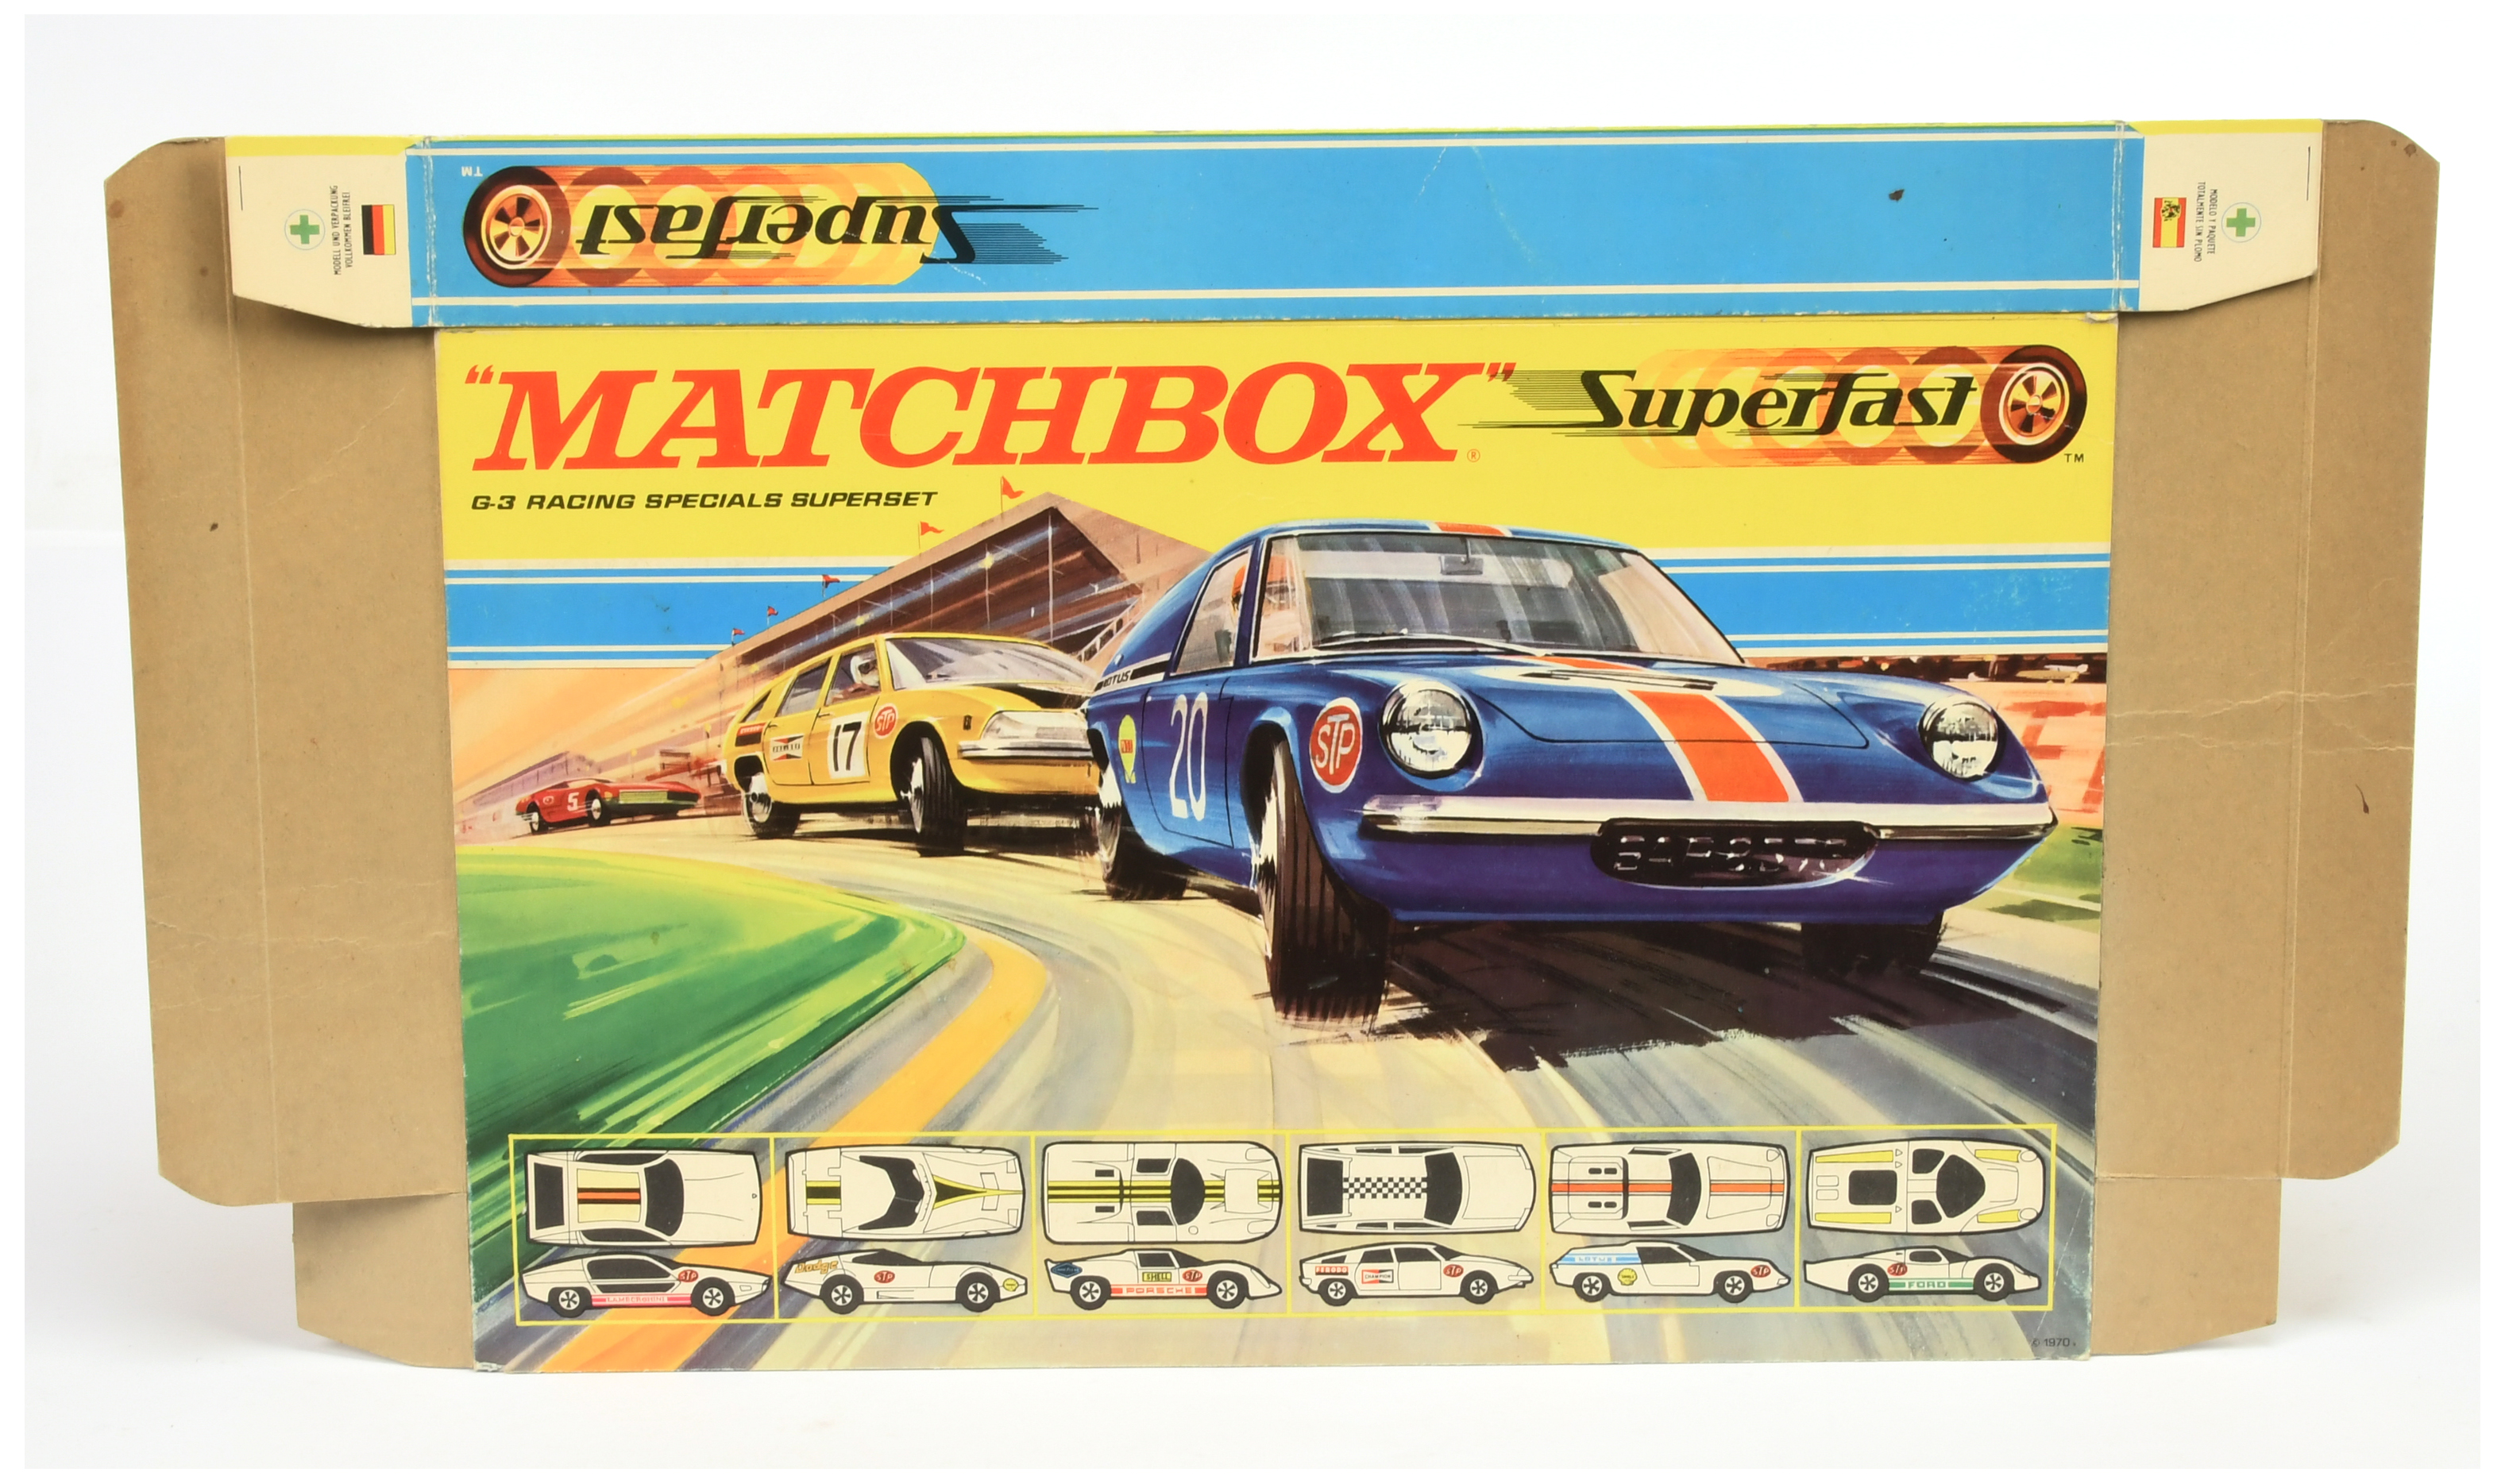 Matchbox Superfast G-3 Racing Specials Gift Set - unused outer sleeve only, possibly final Artist... - Image 2 of 2